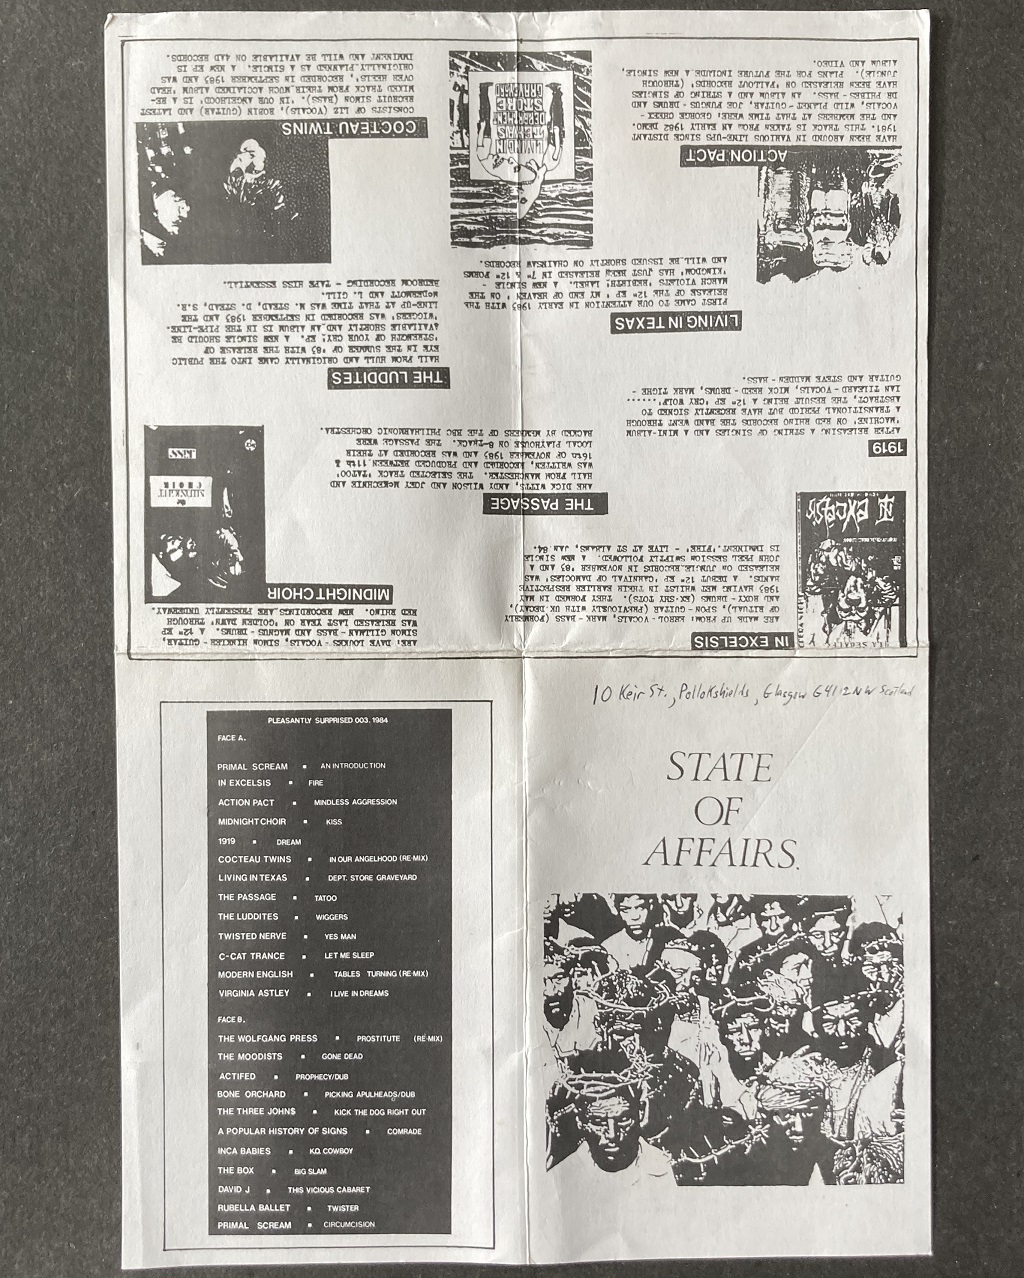 Various artists - 'State Of Affairs' compilation cassette insert side one